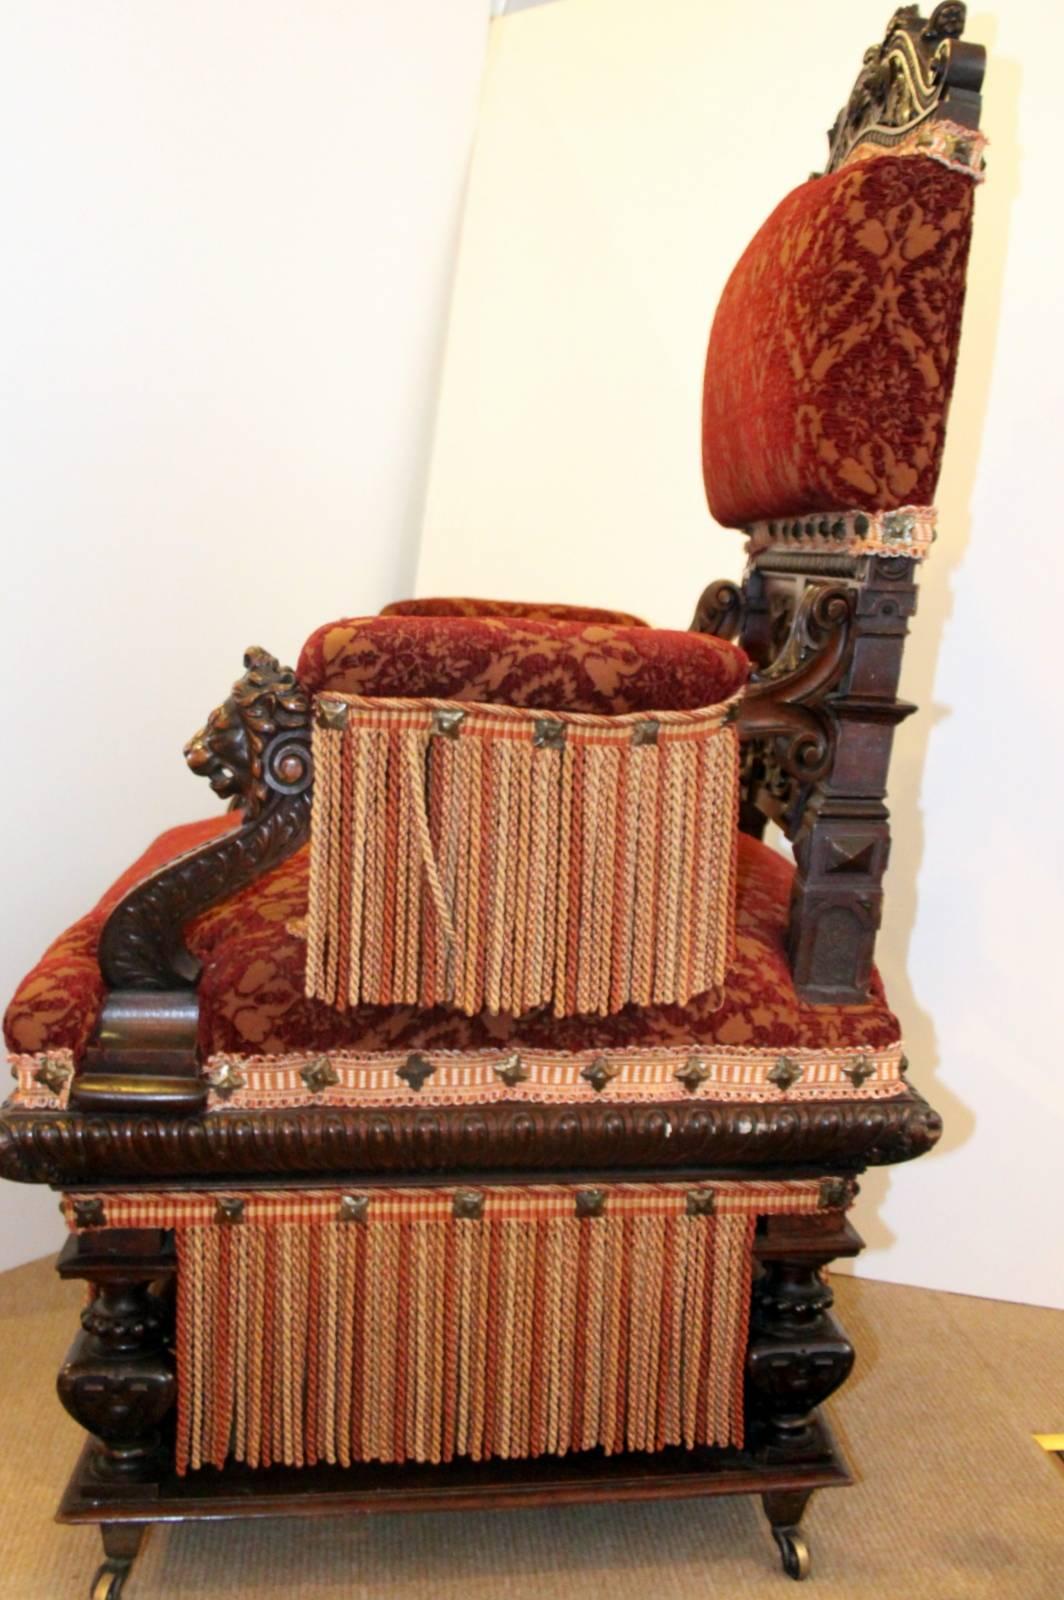 An expertly carved Renaissance Revival gentleman's chair. Carved walnut with new upholstery. The upholstery is very appropriate to what this chair would have from the middle of the 19th century. Lavish fringe with nailhead trim are also very much in